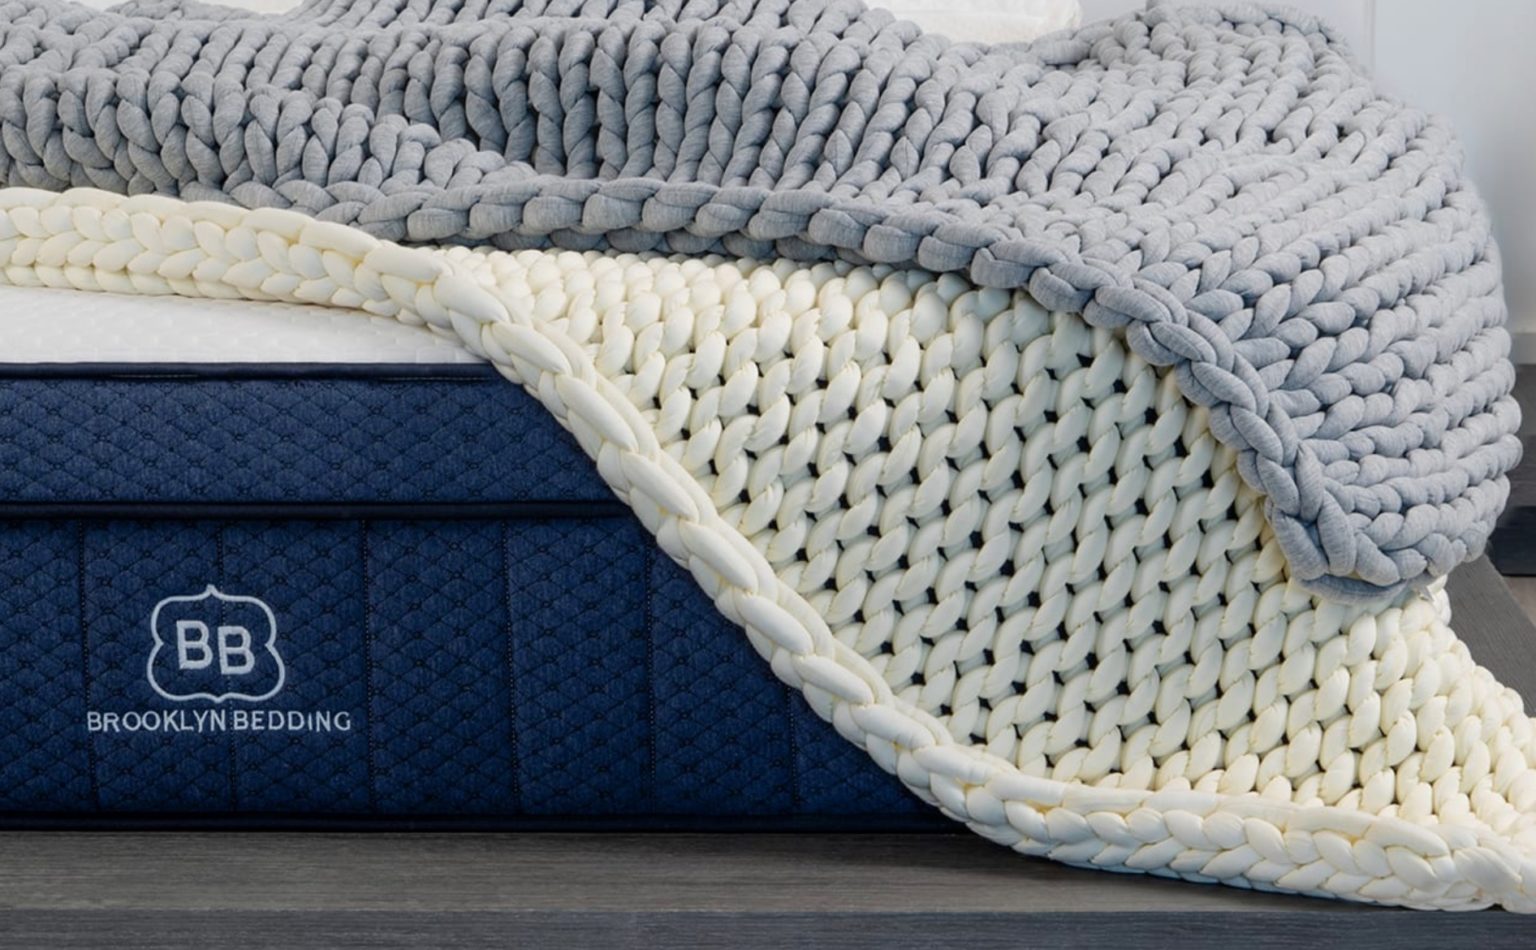 Product page photo of the Brooklyn Bedding Chunky Knit Weighted Blanket